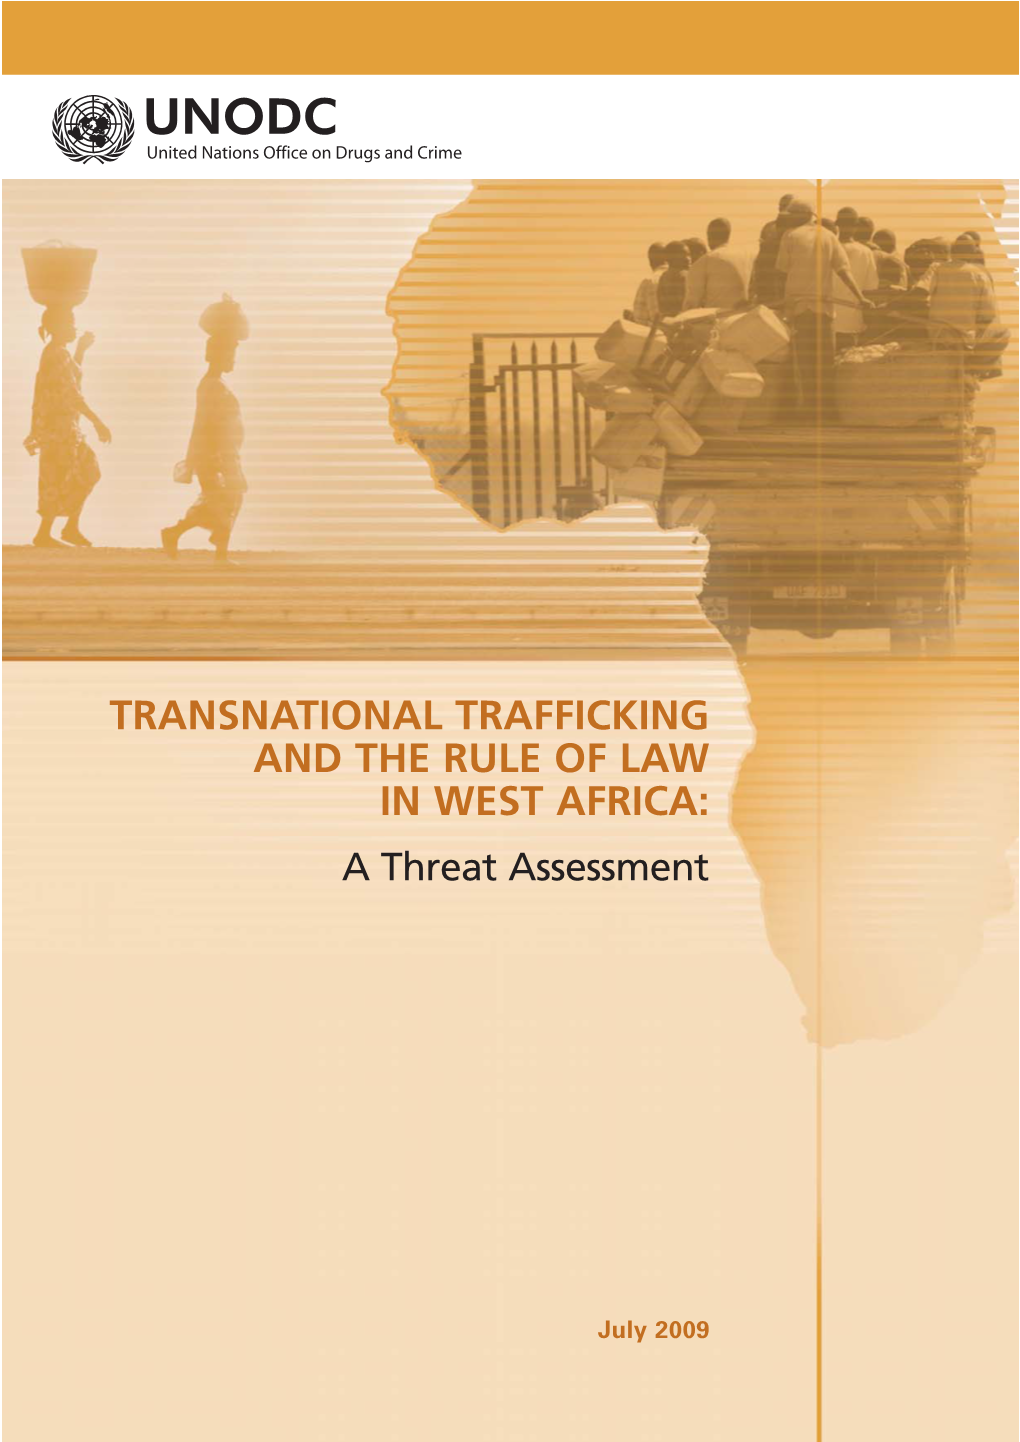 TRANSNATIONAL TRAFFICKING and the RULE of LAW in WEST AFRICA: a Threat Assessment